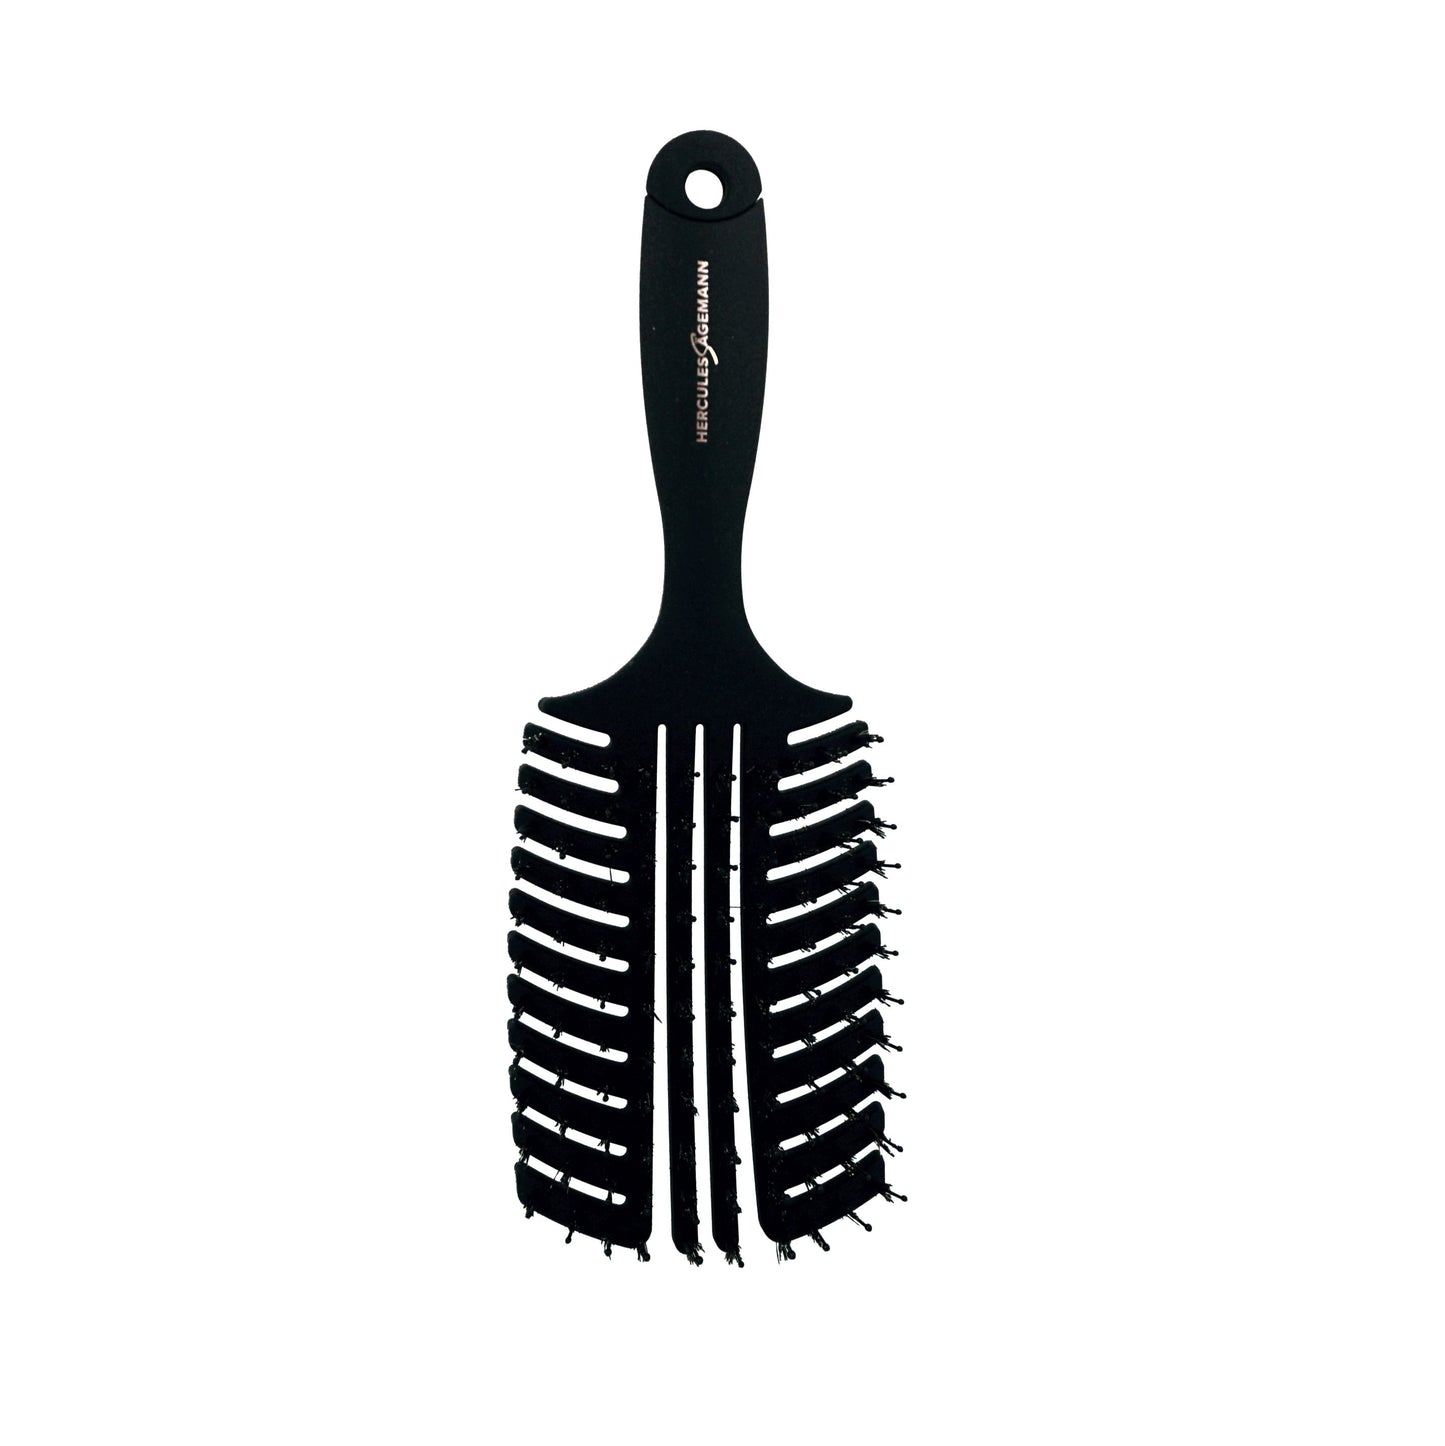 DF Boars Brush (Red) Detail Brush - Large (9.5/2 Brush by 1)